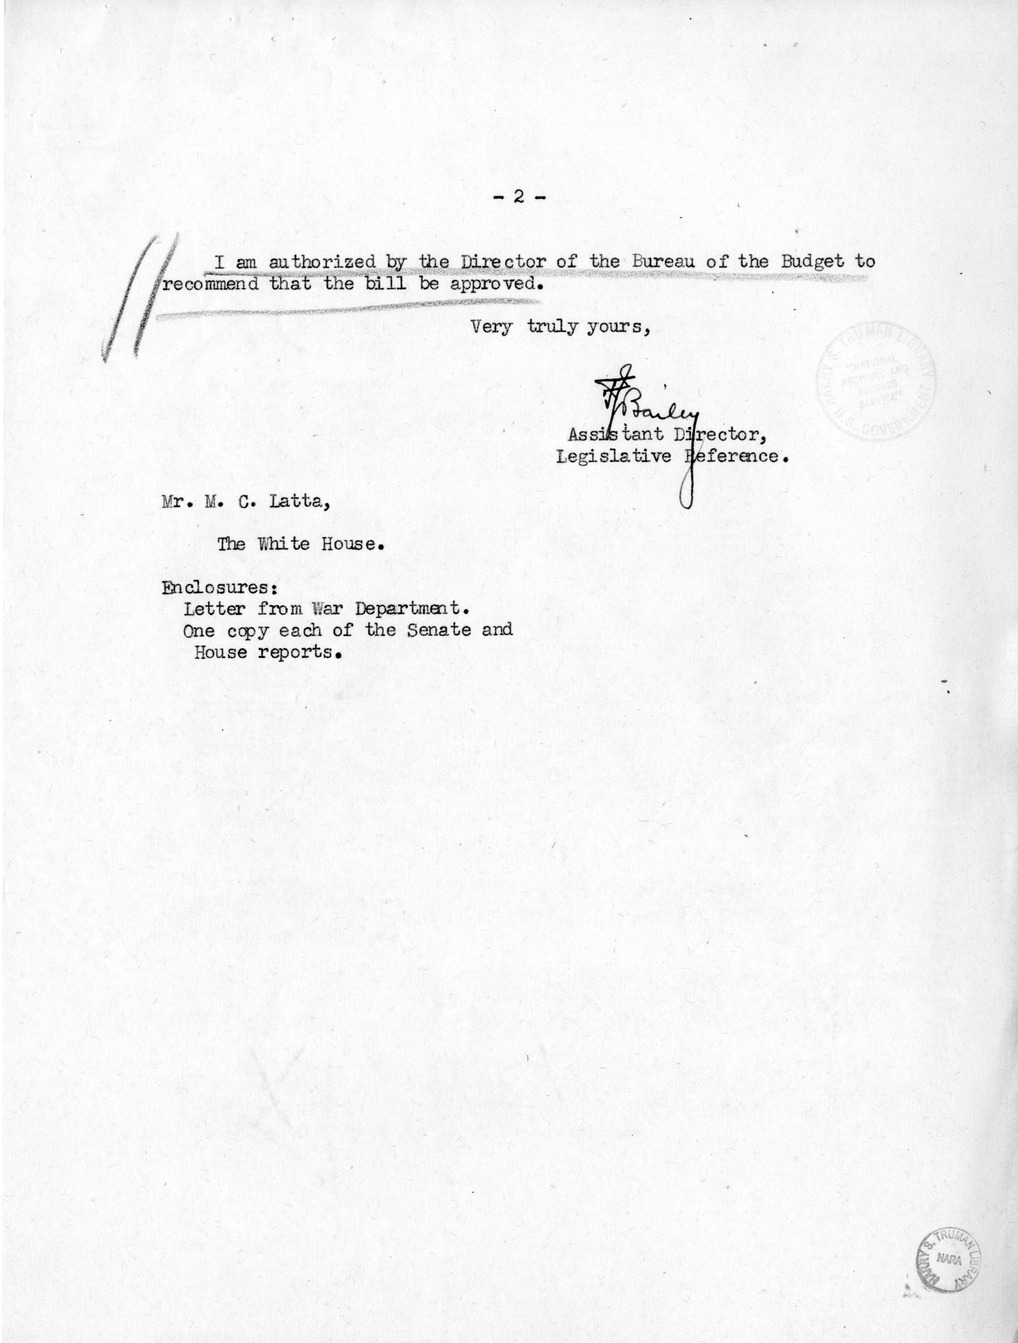 Memorandum from Frederick J. Bailey to M. C. Latta, S. 980, For the Relief of Mr. and Mrs. Edmund J. Saint Amant, Junior, with Attachments